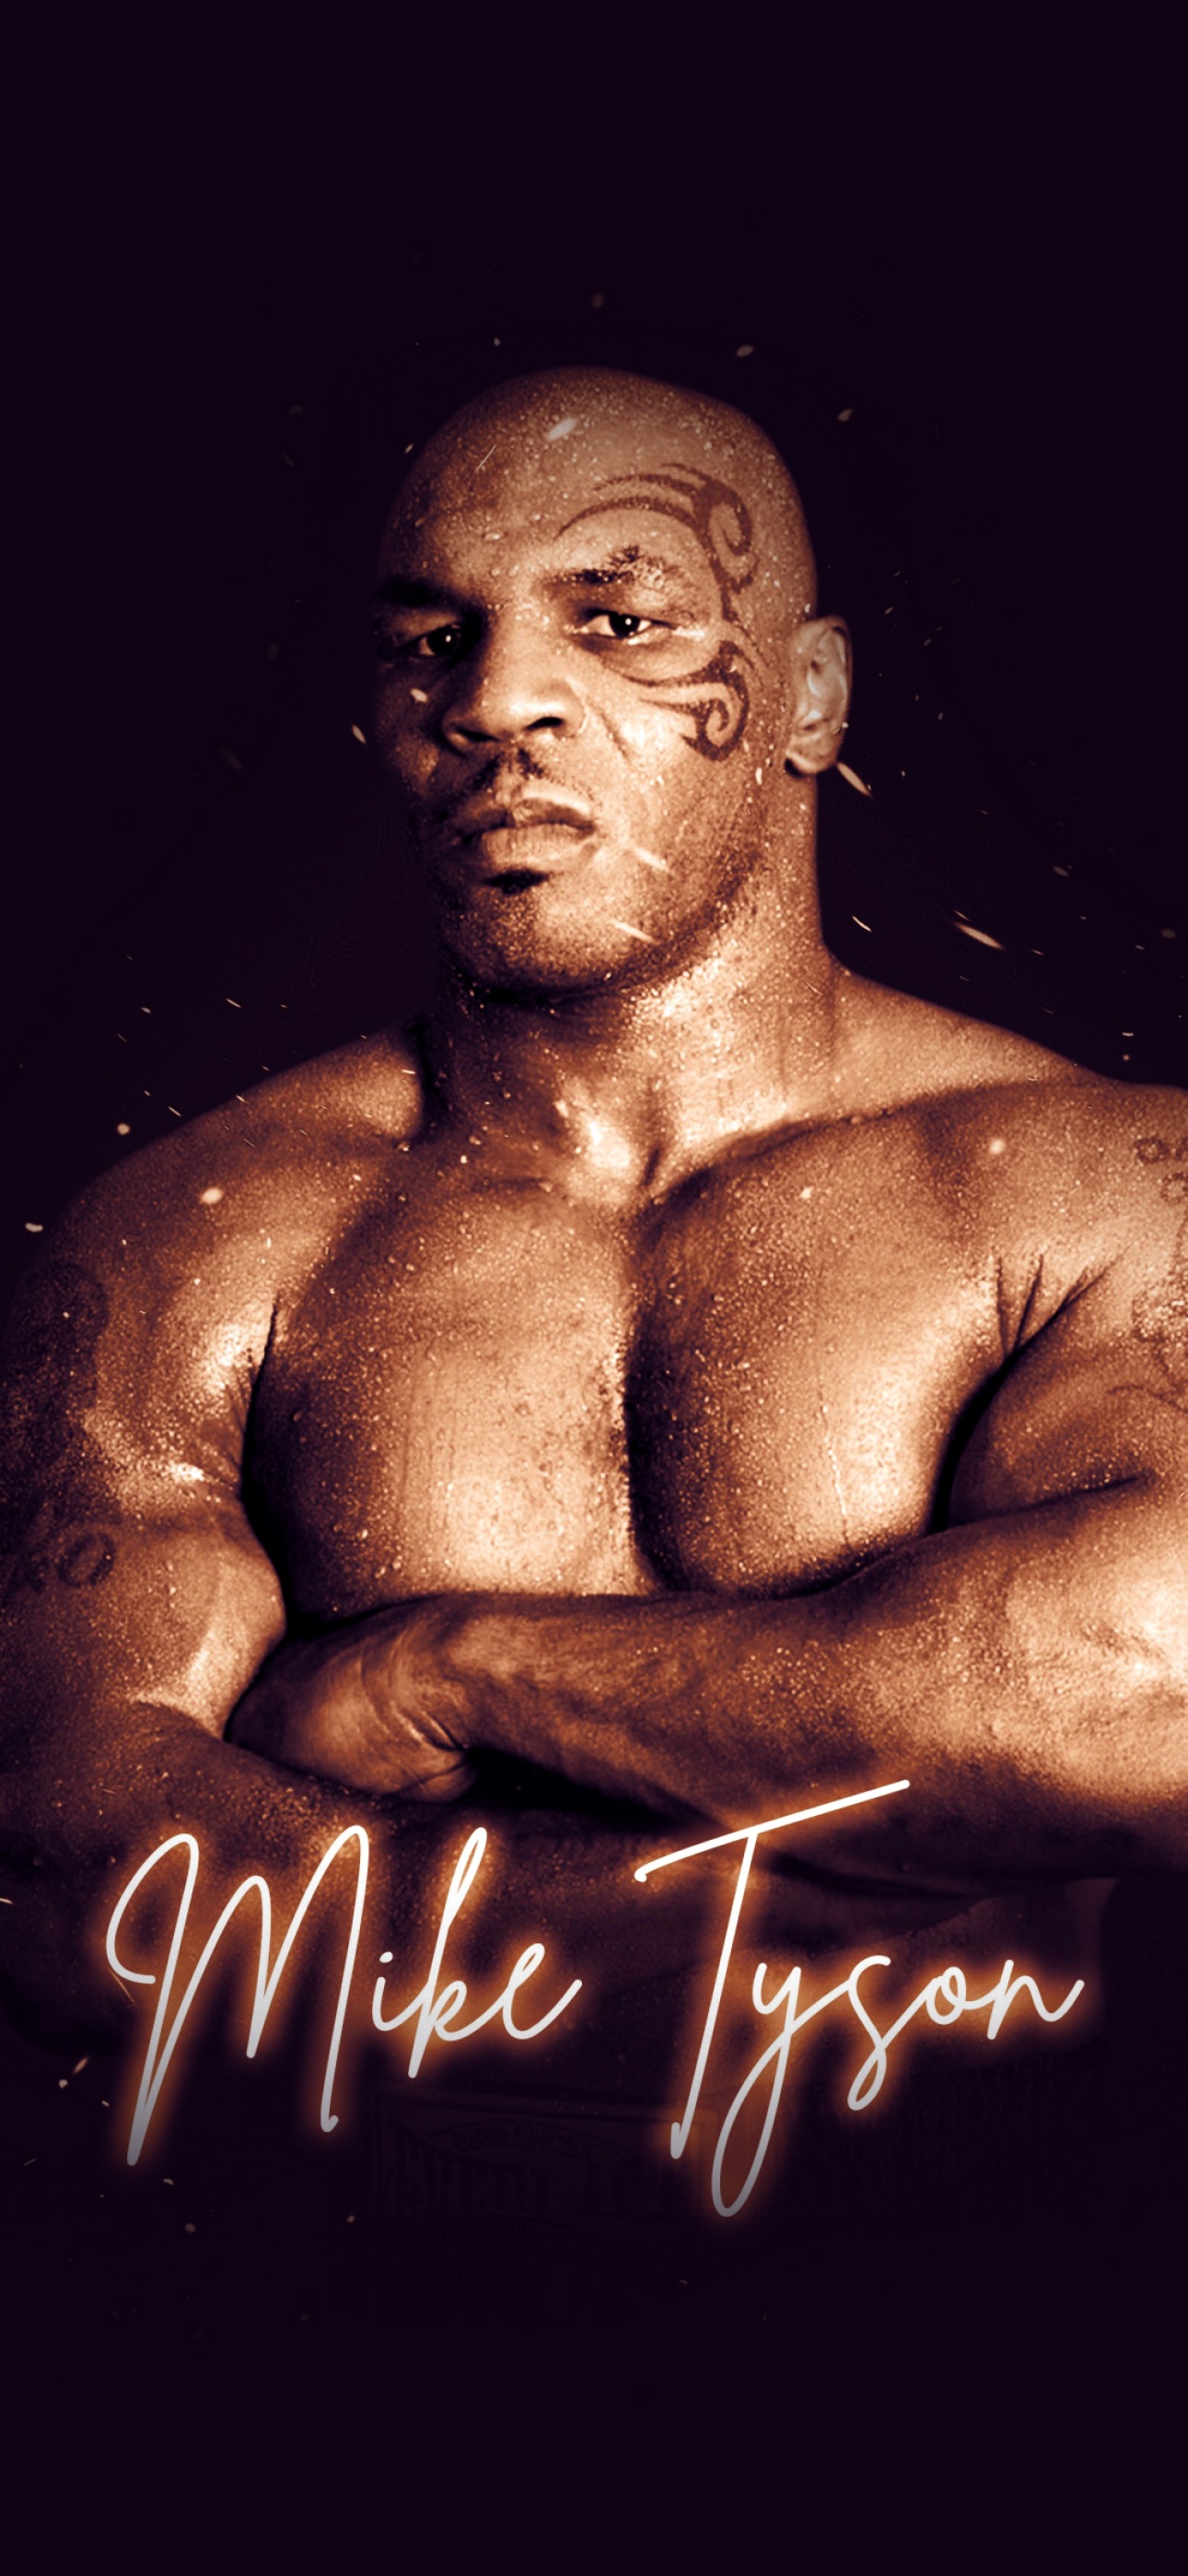 HD wallpaper Mike Tyson Sports Boxing one person indoors text adult   Wallpaper Flare